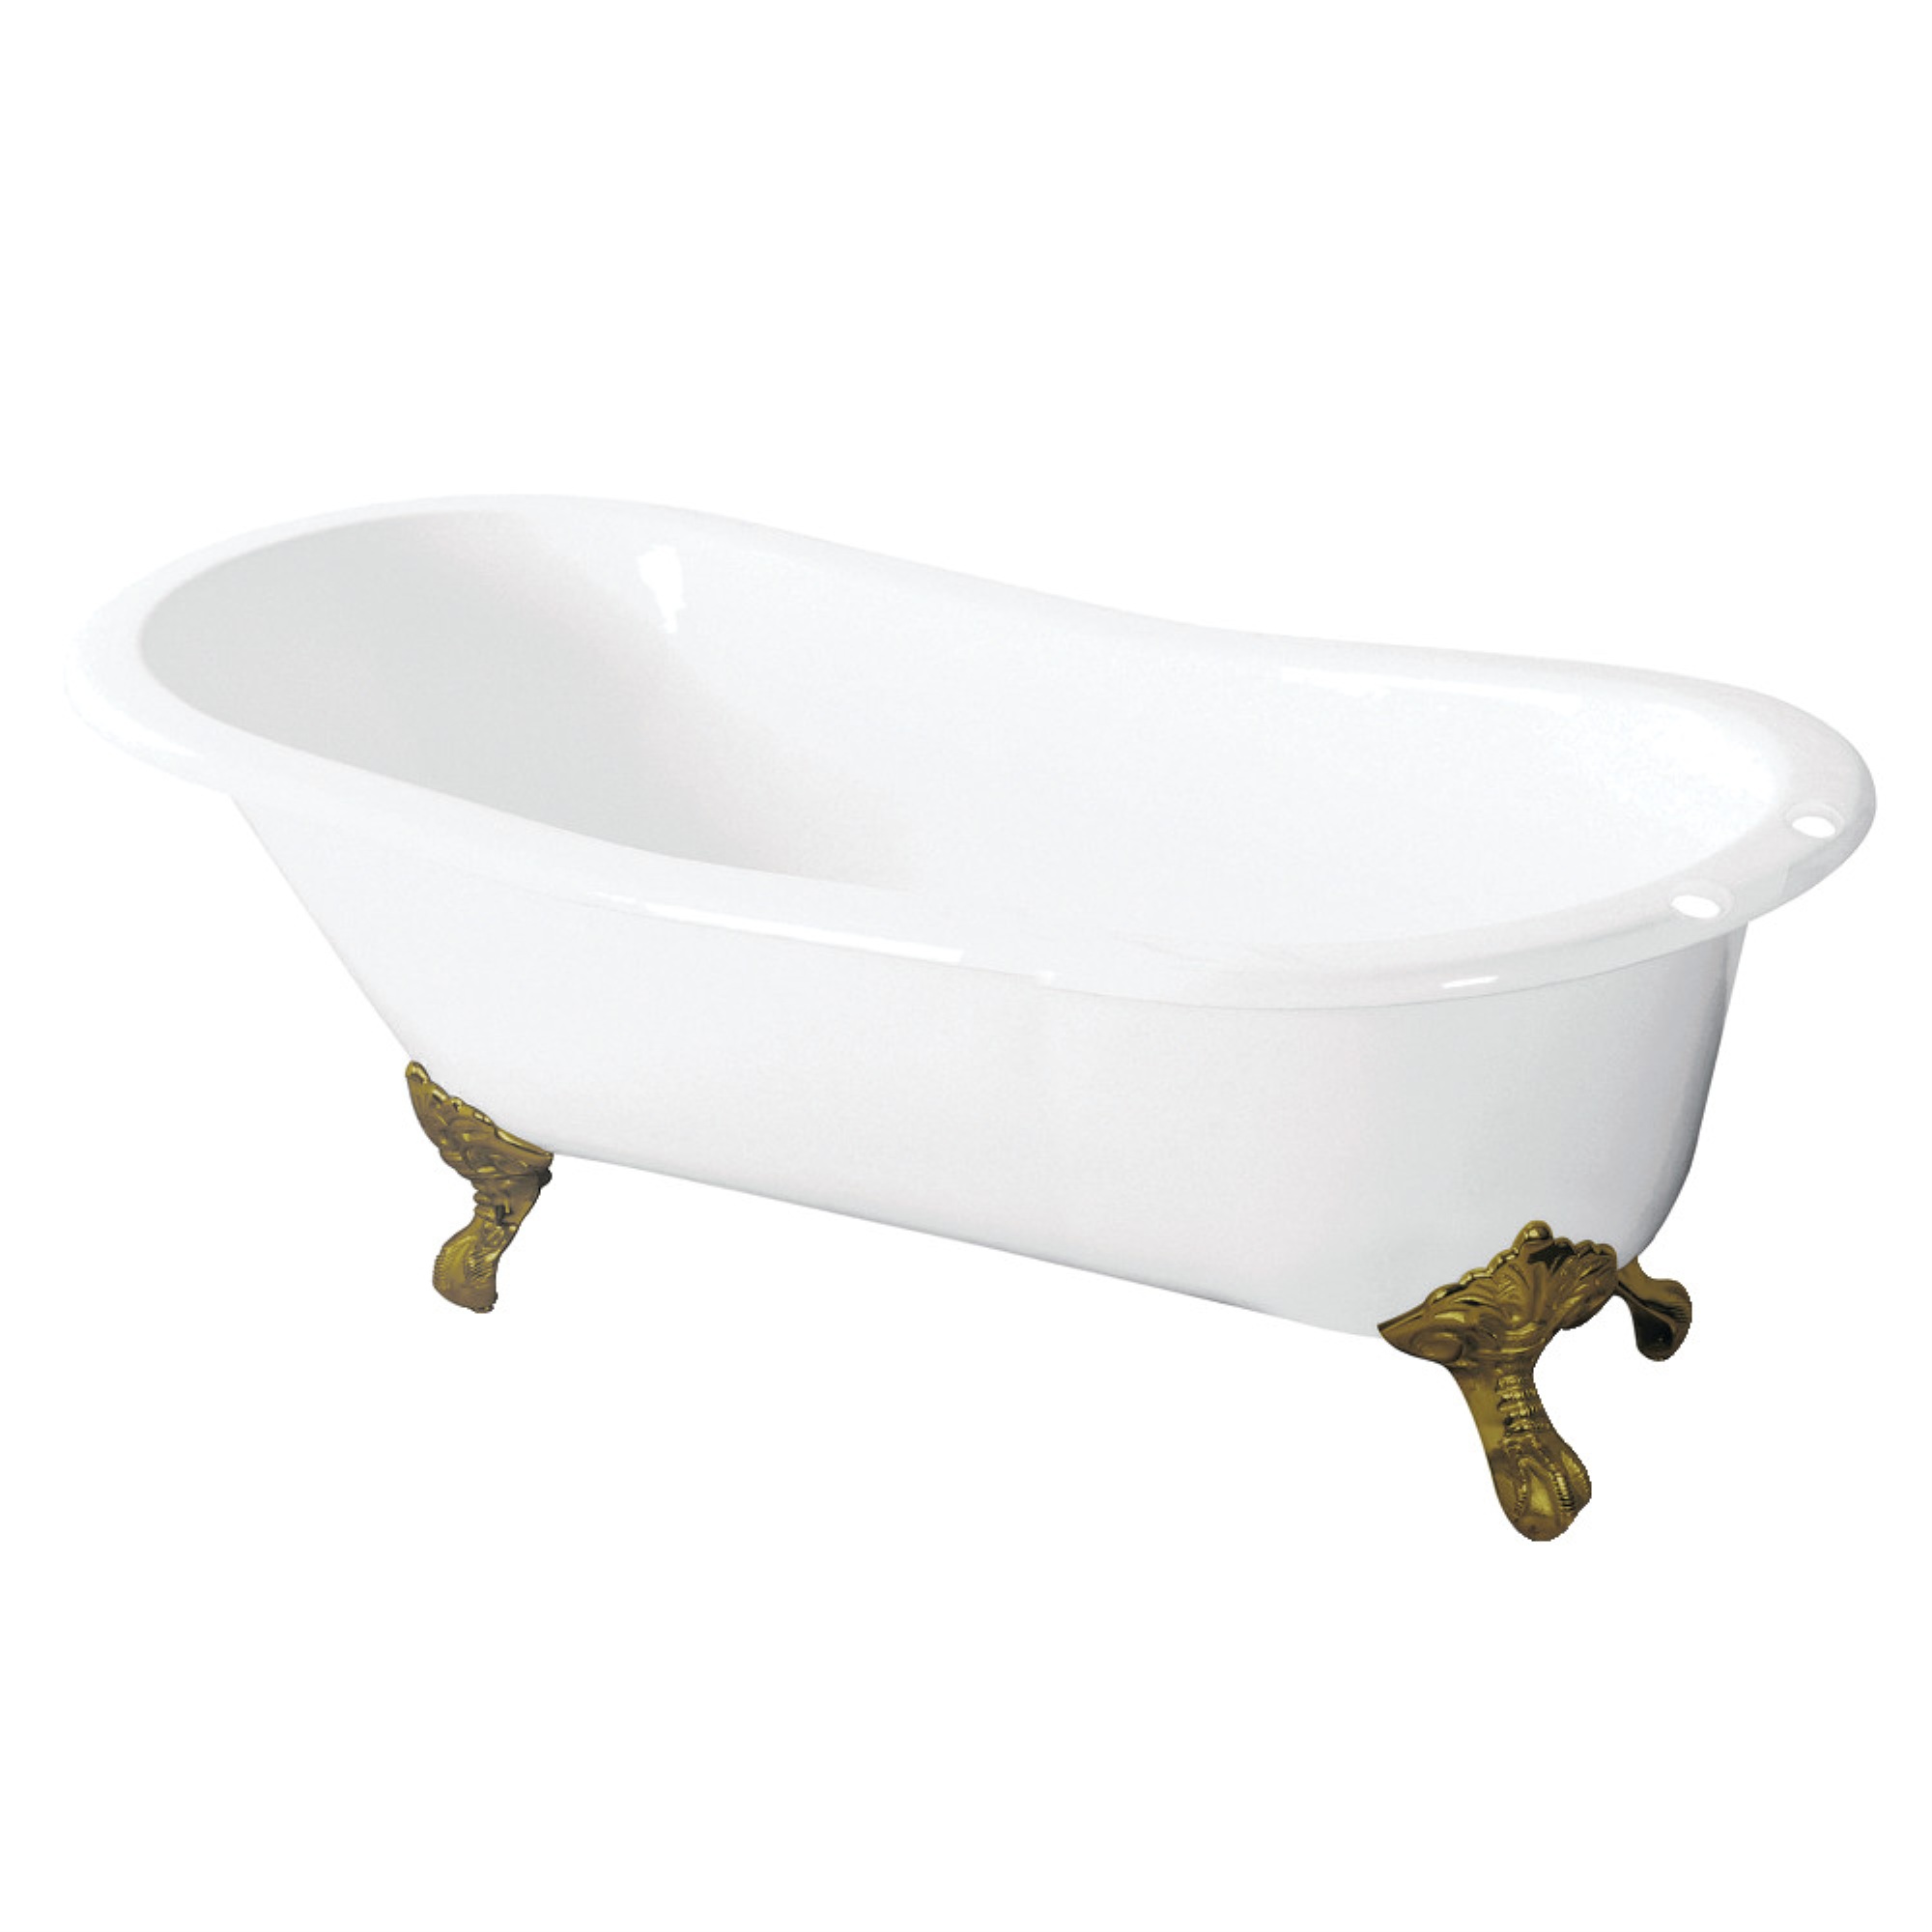 Aqua Eden VCT7D5731B2 57-Inch Cast Iron Slipper Clawfoot Tub with 7-Inch Faucet Drillings, White/Polished Brass